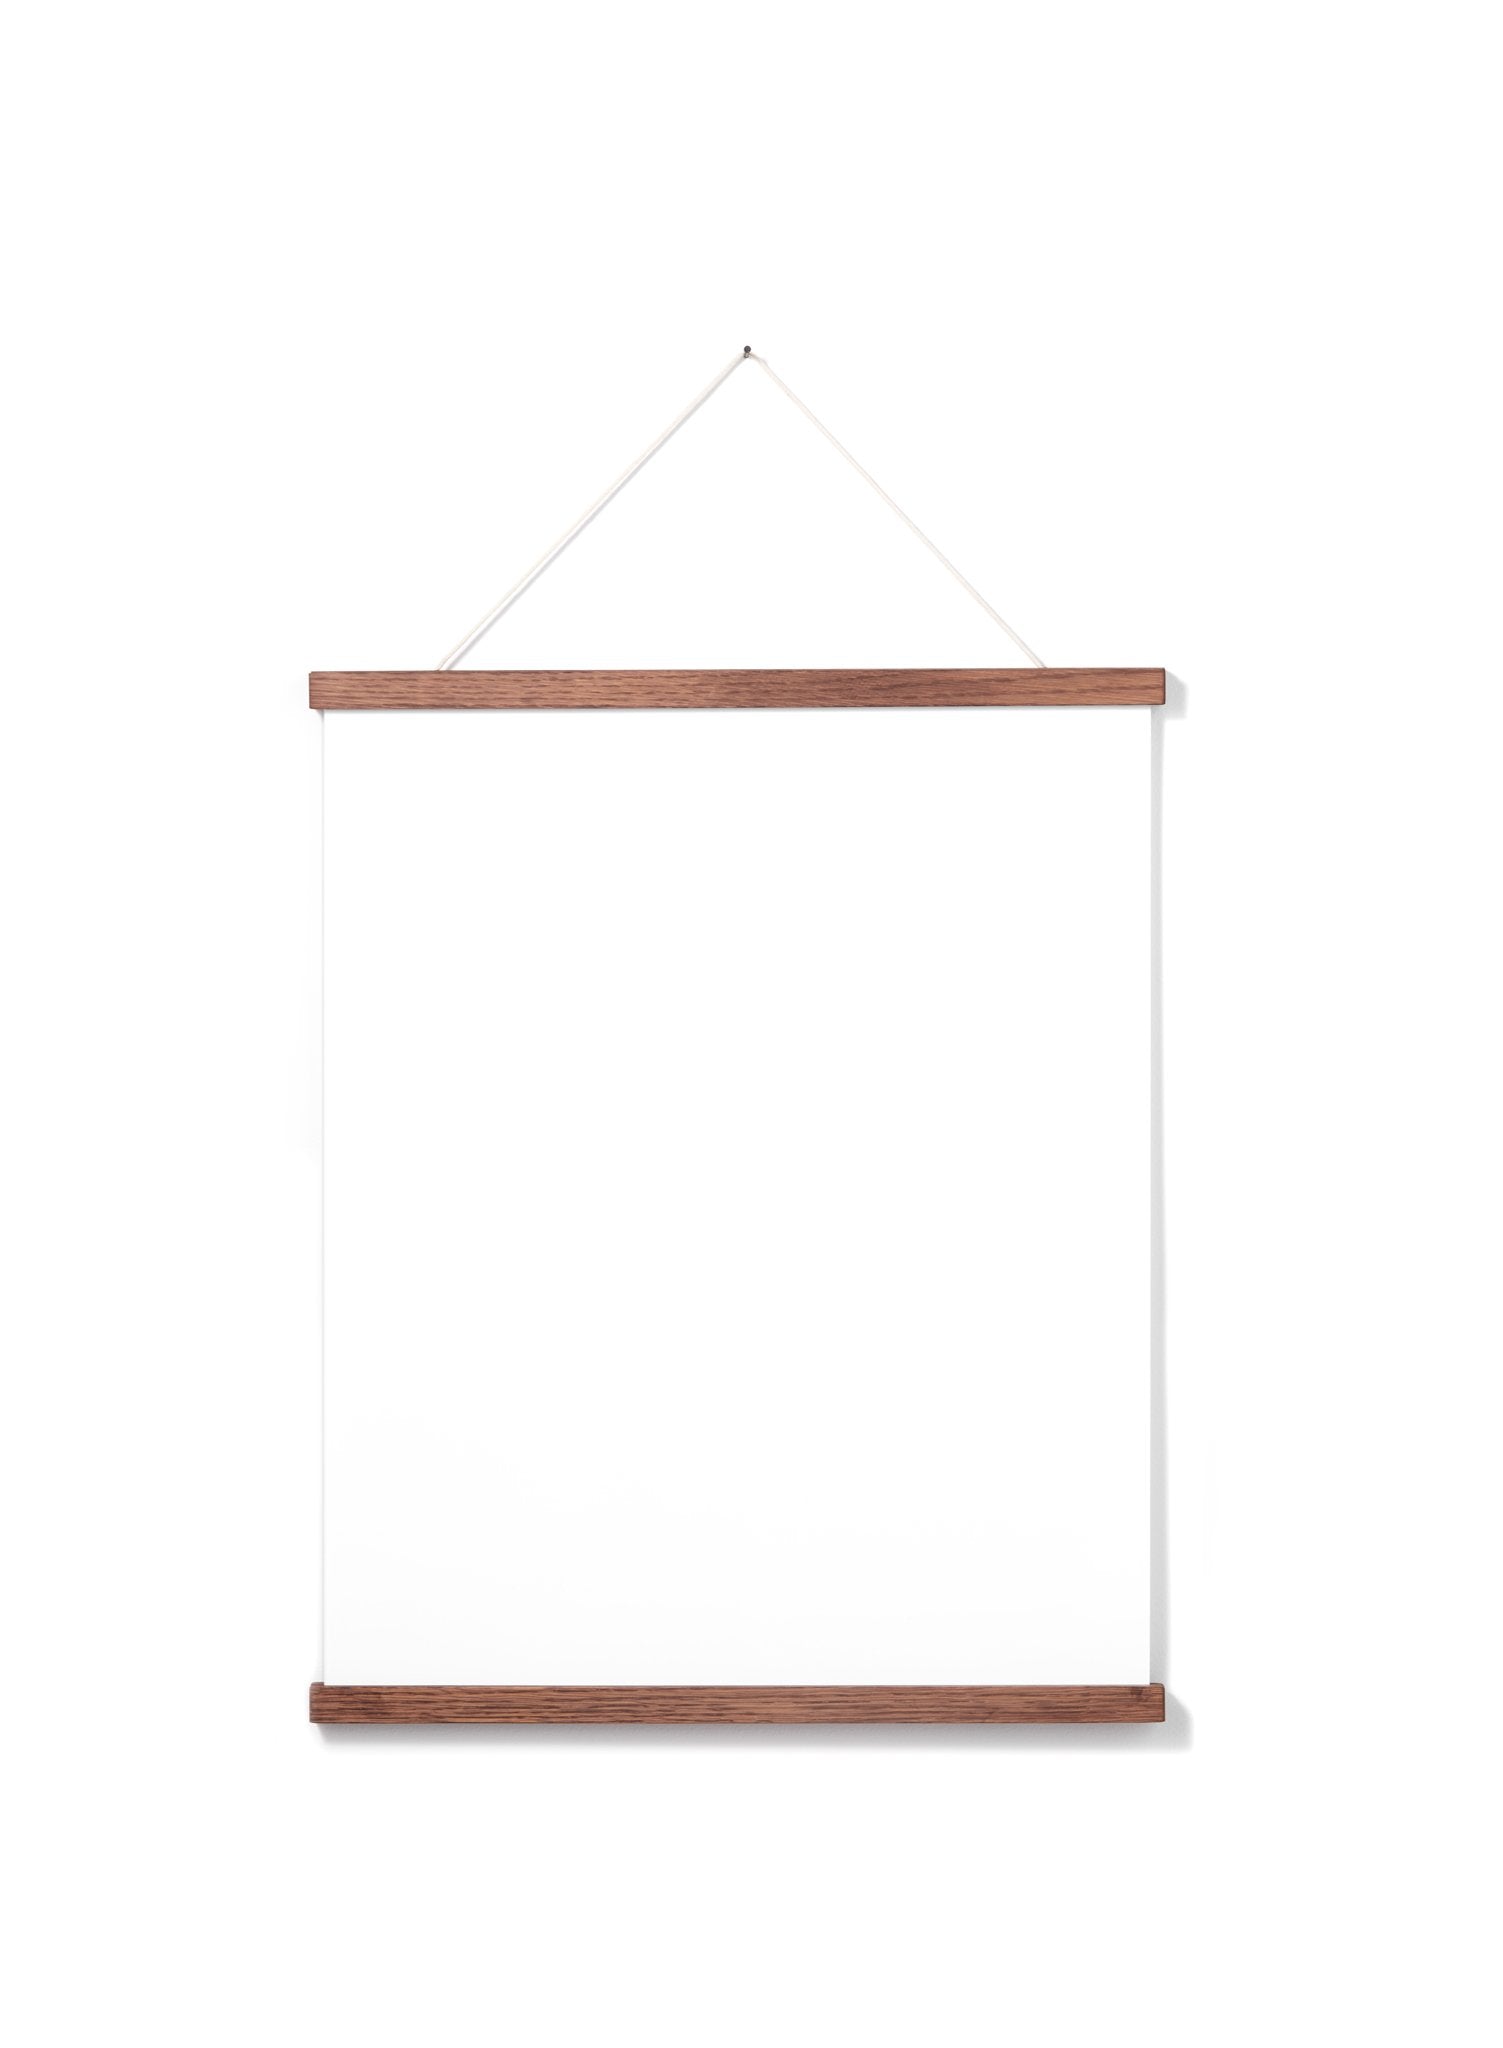 Scandinavian dark oak poster wall hanger by Opposite Wall - Front of the poster hanger - Size 16 inches